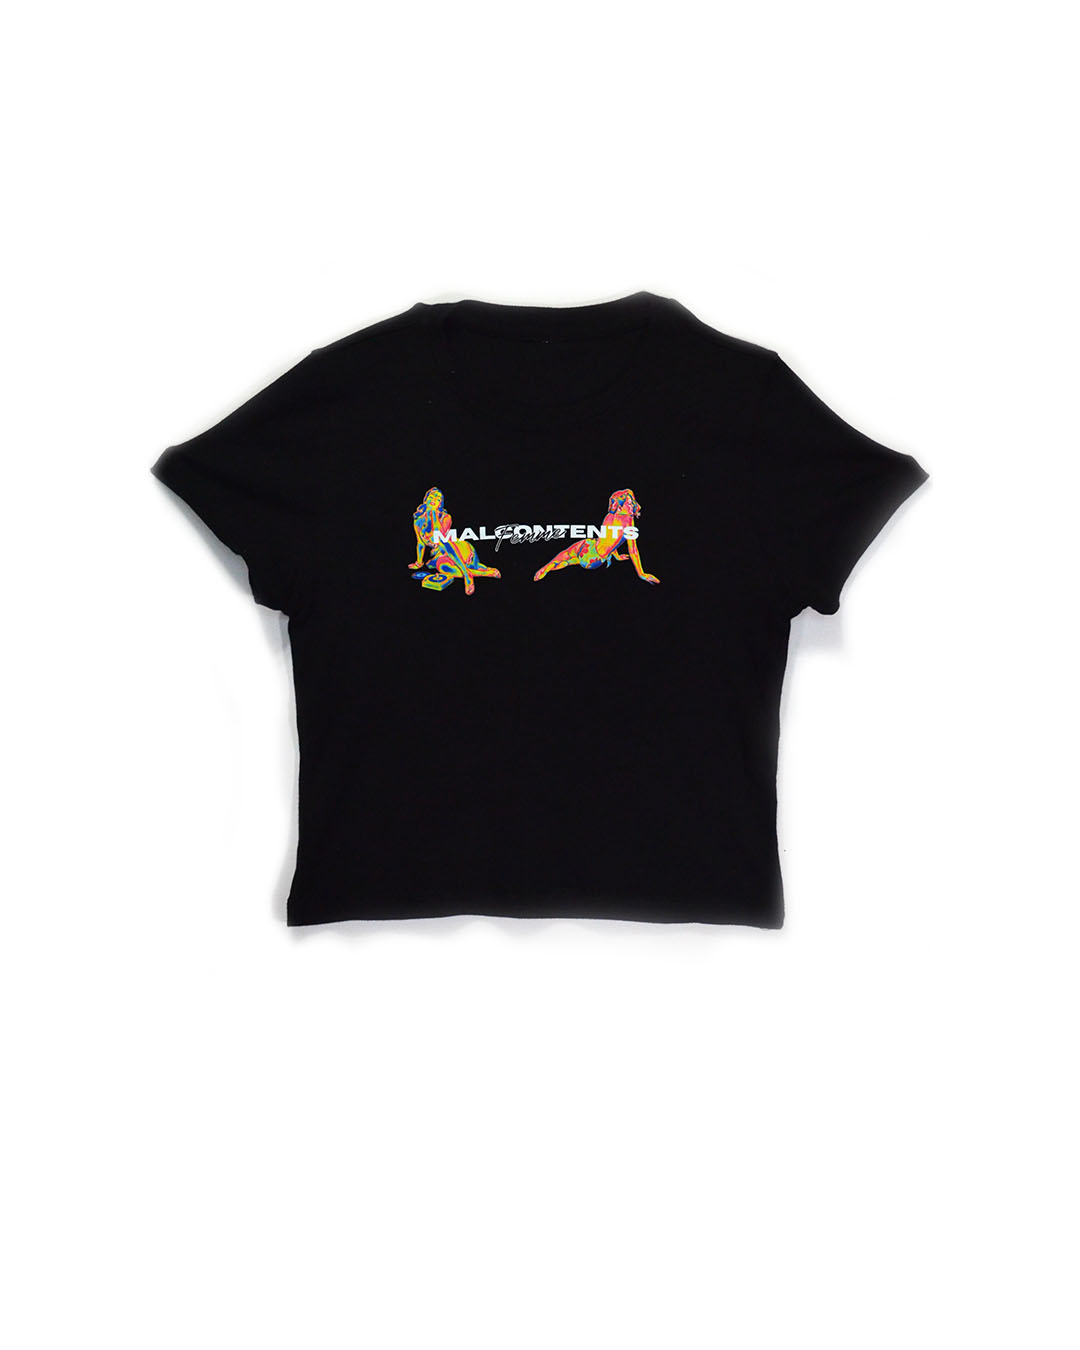 a black shirt with a colorful design on it